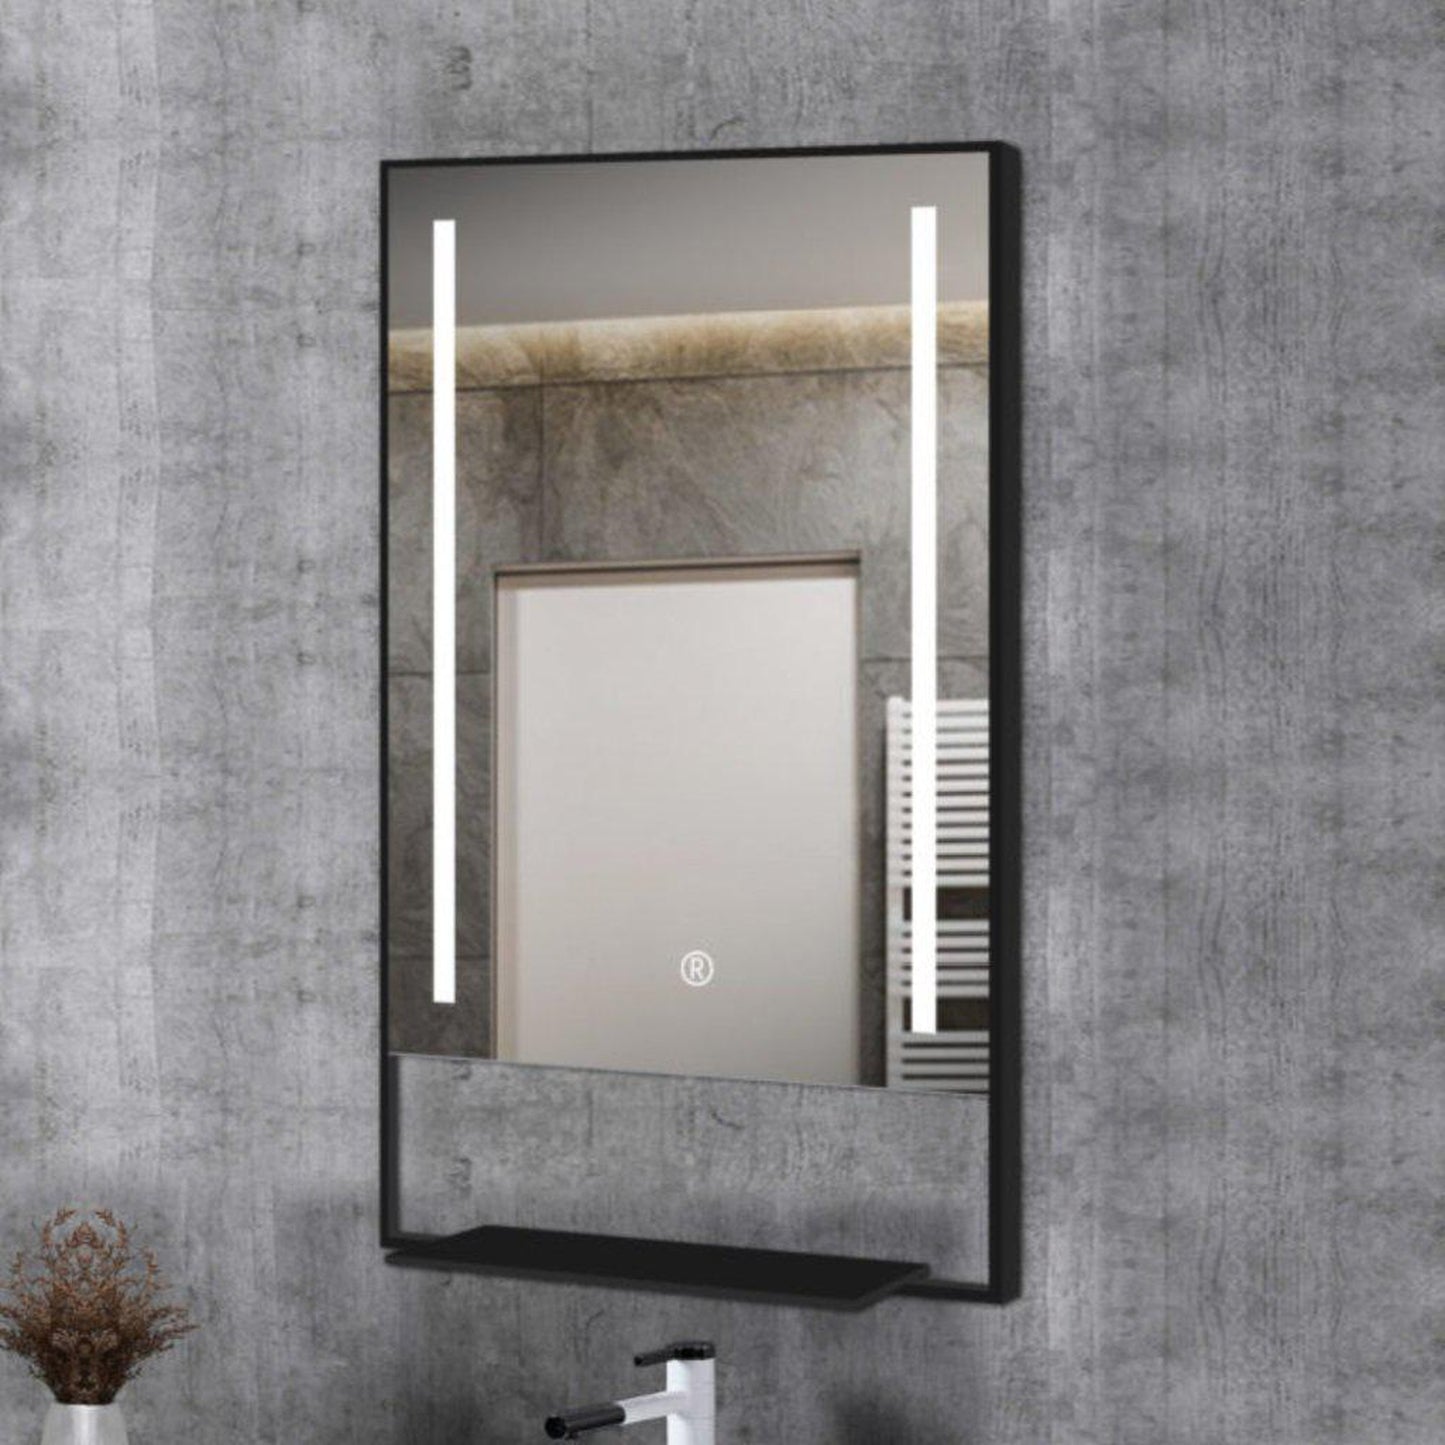 Lighted Impressions Luxe 24" x 32" Rectangular Framed Wall-Mounted LED Mirror With Touch Sensor & Open Shelf